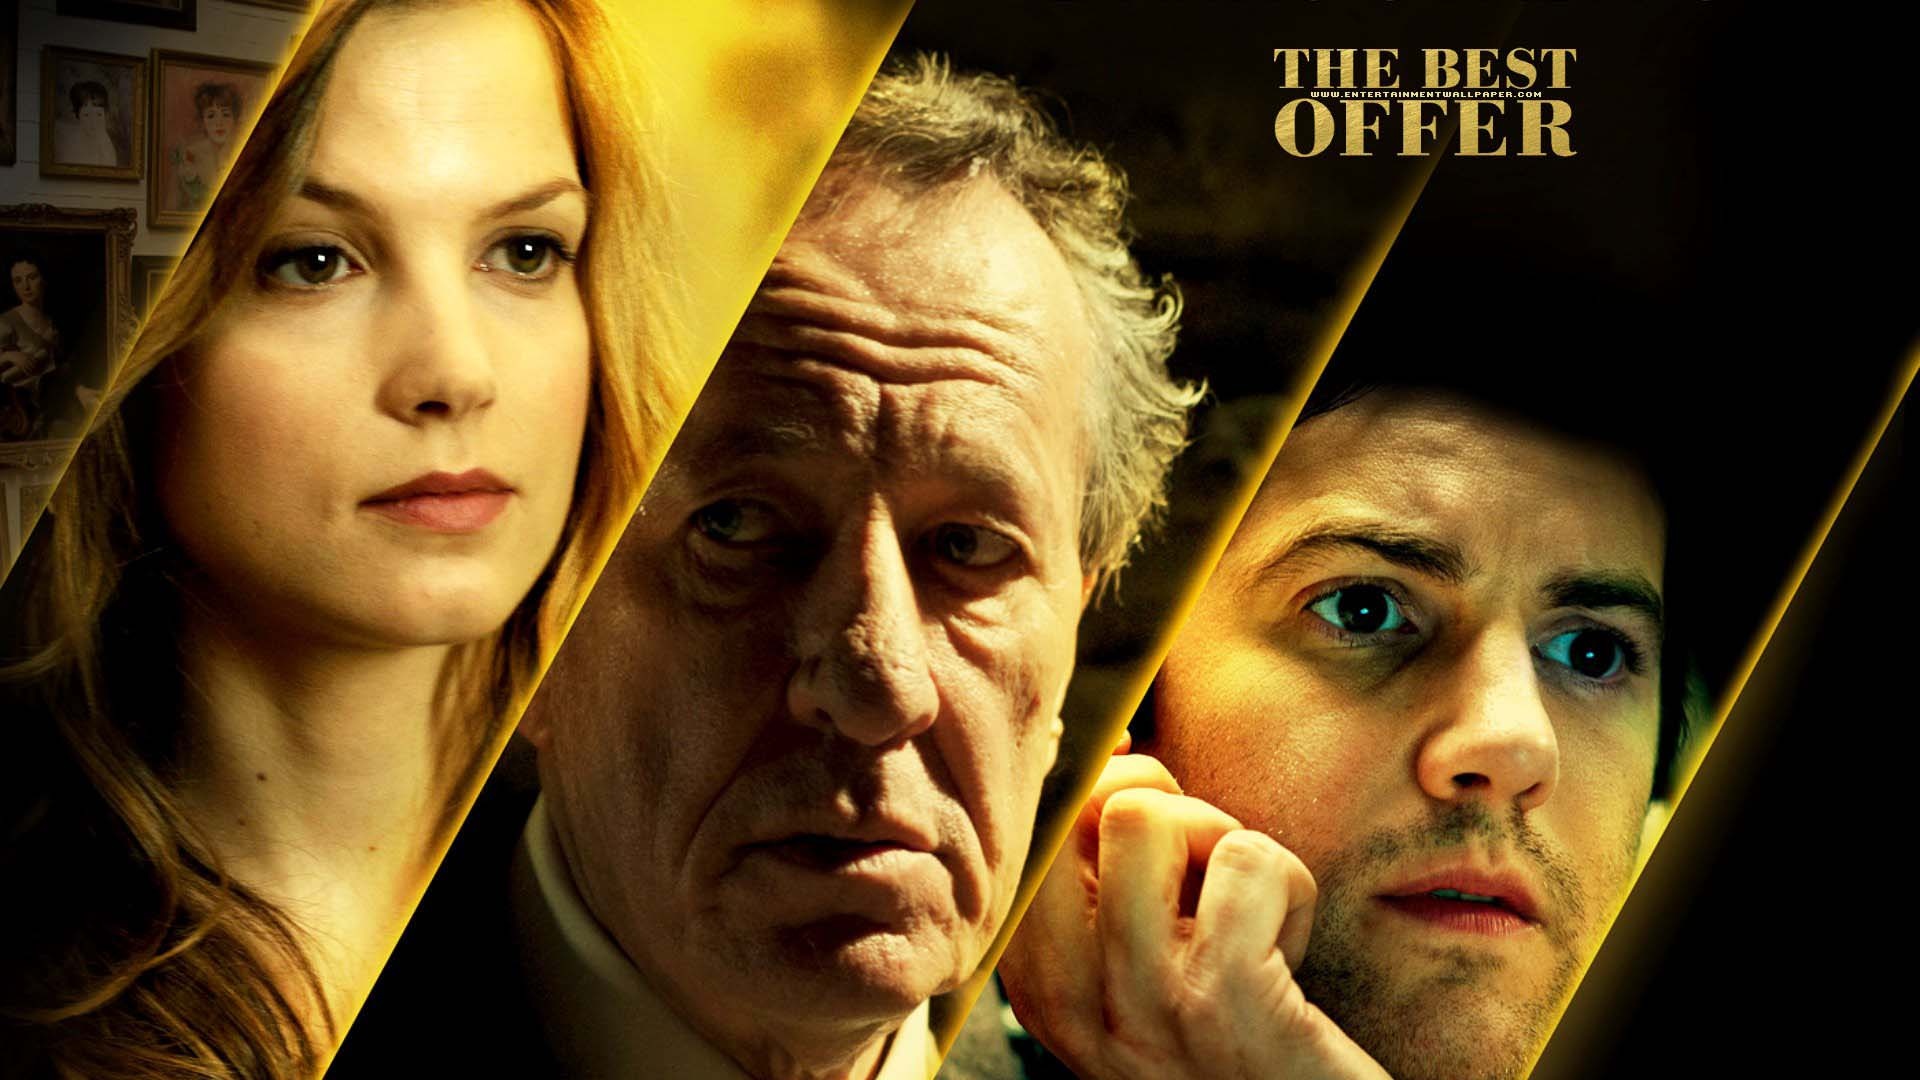 The Best Offer 2013, Romantic drama, Complex characters, Mysterious love story, 1920x1080 Full HD Desktop